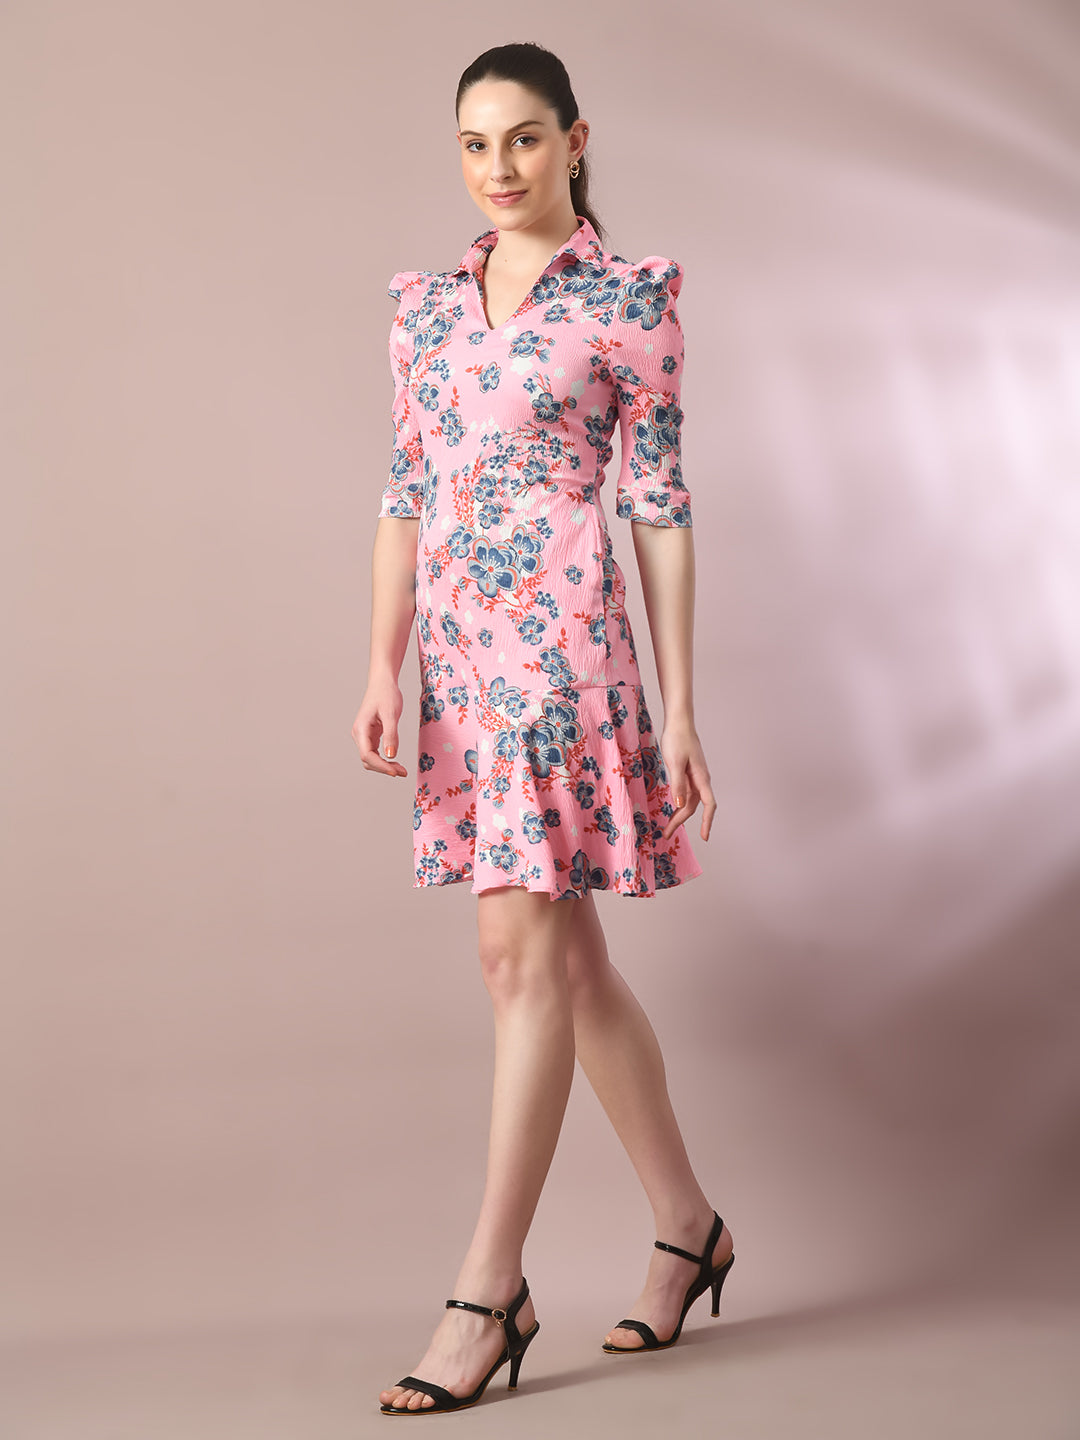 Women's  Pink Printed Shirt Collar Fit And Flare Party Dress  - Myshka